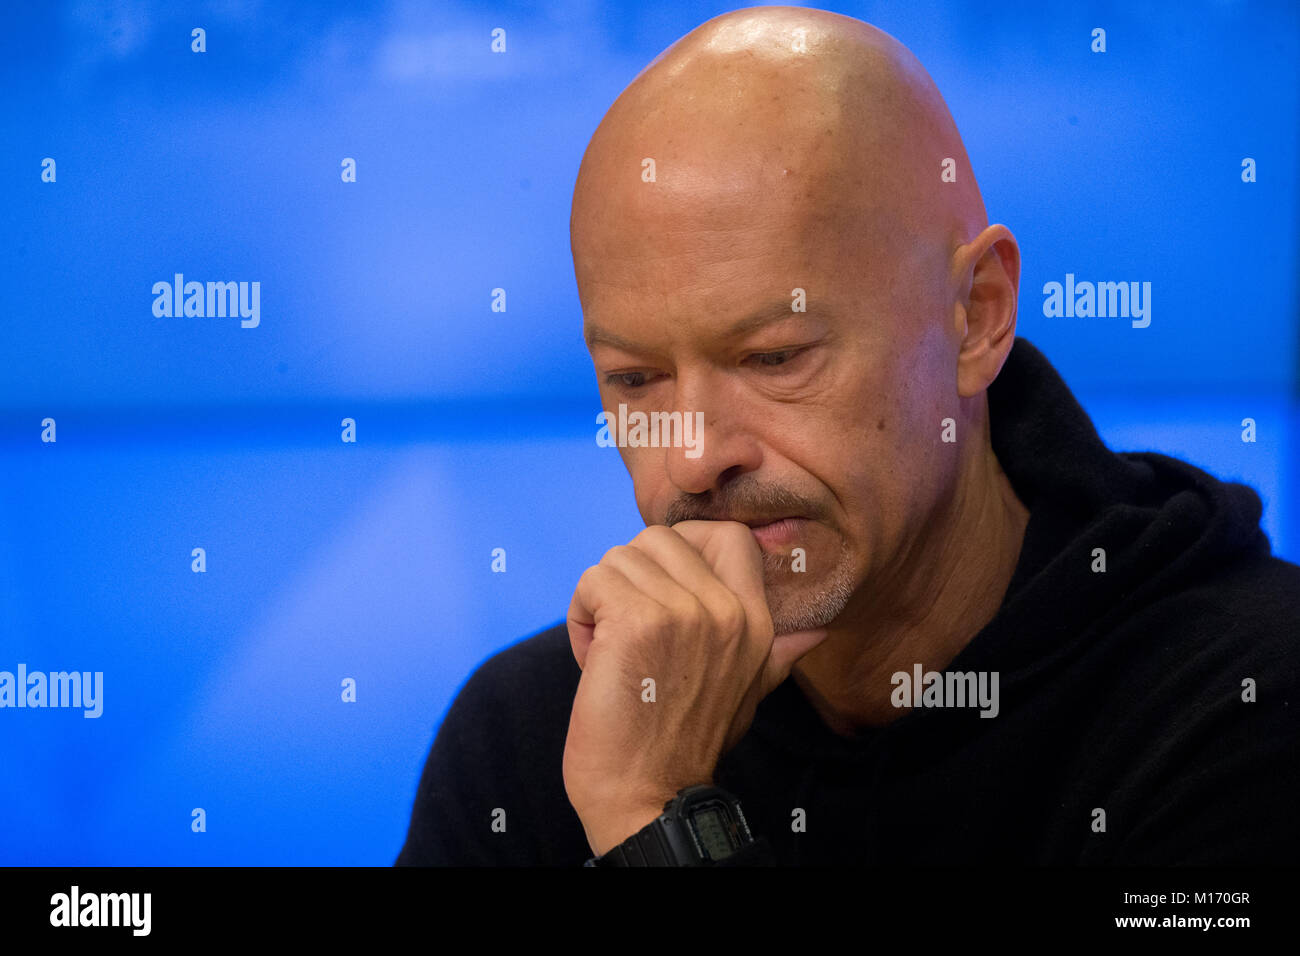 Moscow, Russia. 25th January, 2018. Film director and actor Fyodor Bondarchuk at a news conference ahead of the press-preview of the Selfie film at the Rossiya Segodnya news agency's international multimedia press center.  Credit: Victor Vytolskiy/Alamy Live News Stock Photo